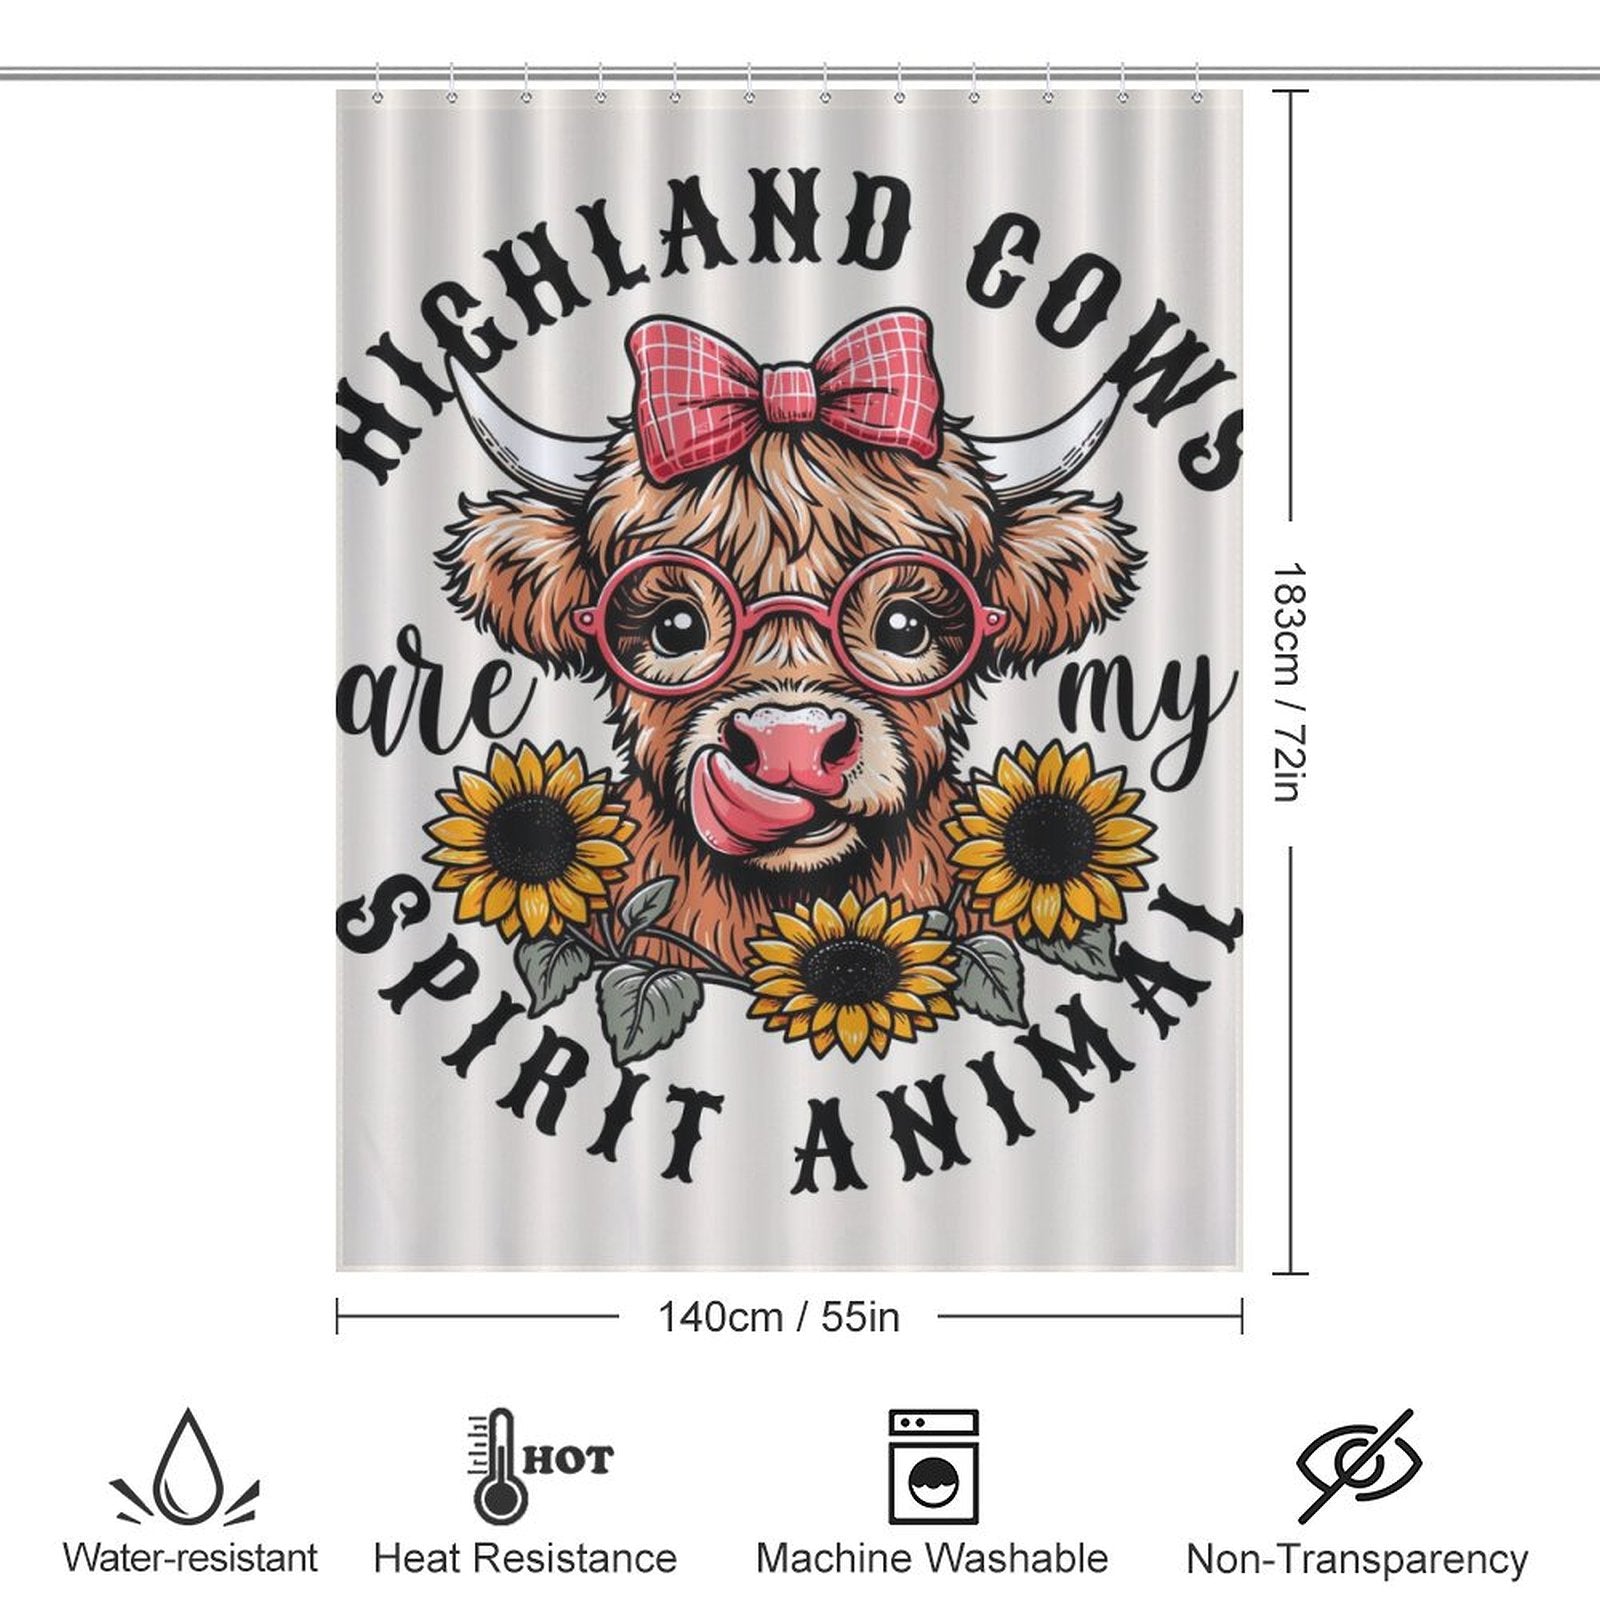 This Cute Sunflower Glasses Highland Cow Shower Curtain-Cottoncat is perfect for bathroom decor, featuring a cute cartoon Highland cow with glasses and a bow, surrounded by sunflowers. The text reads "Highland cows are my spirit animal." Icons note it's water-resistant, heat-resistant, machine washable, and non-transparent.
